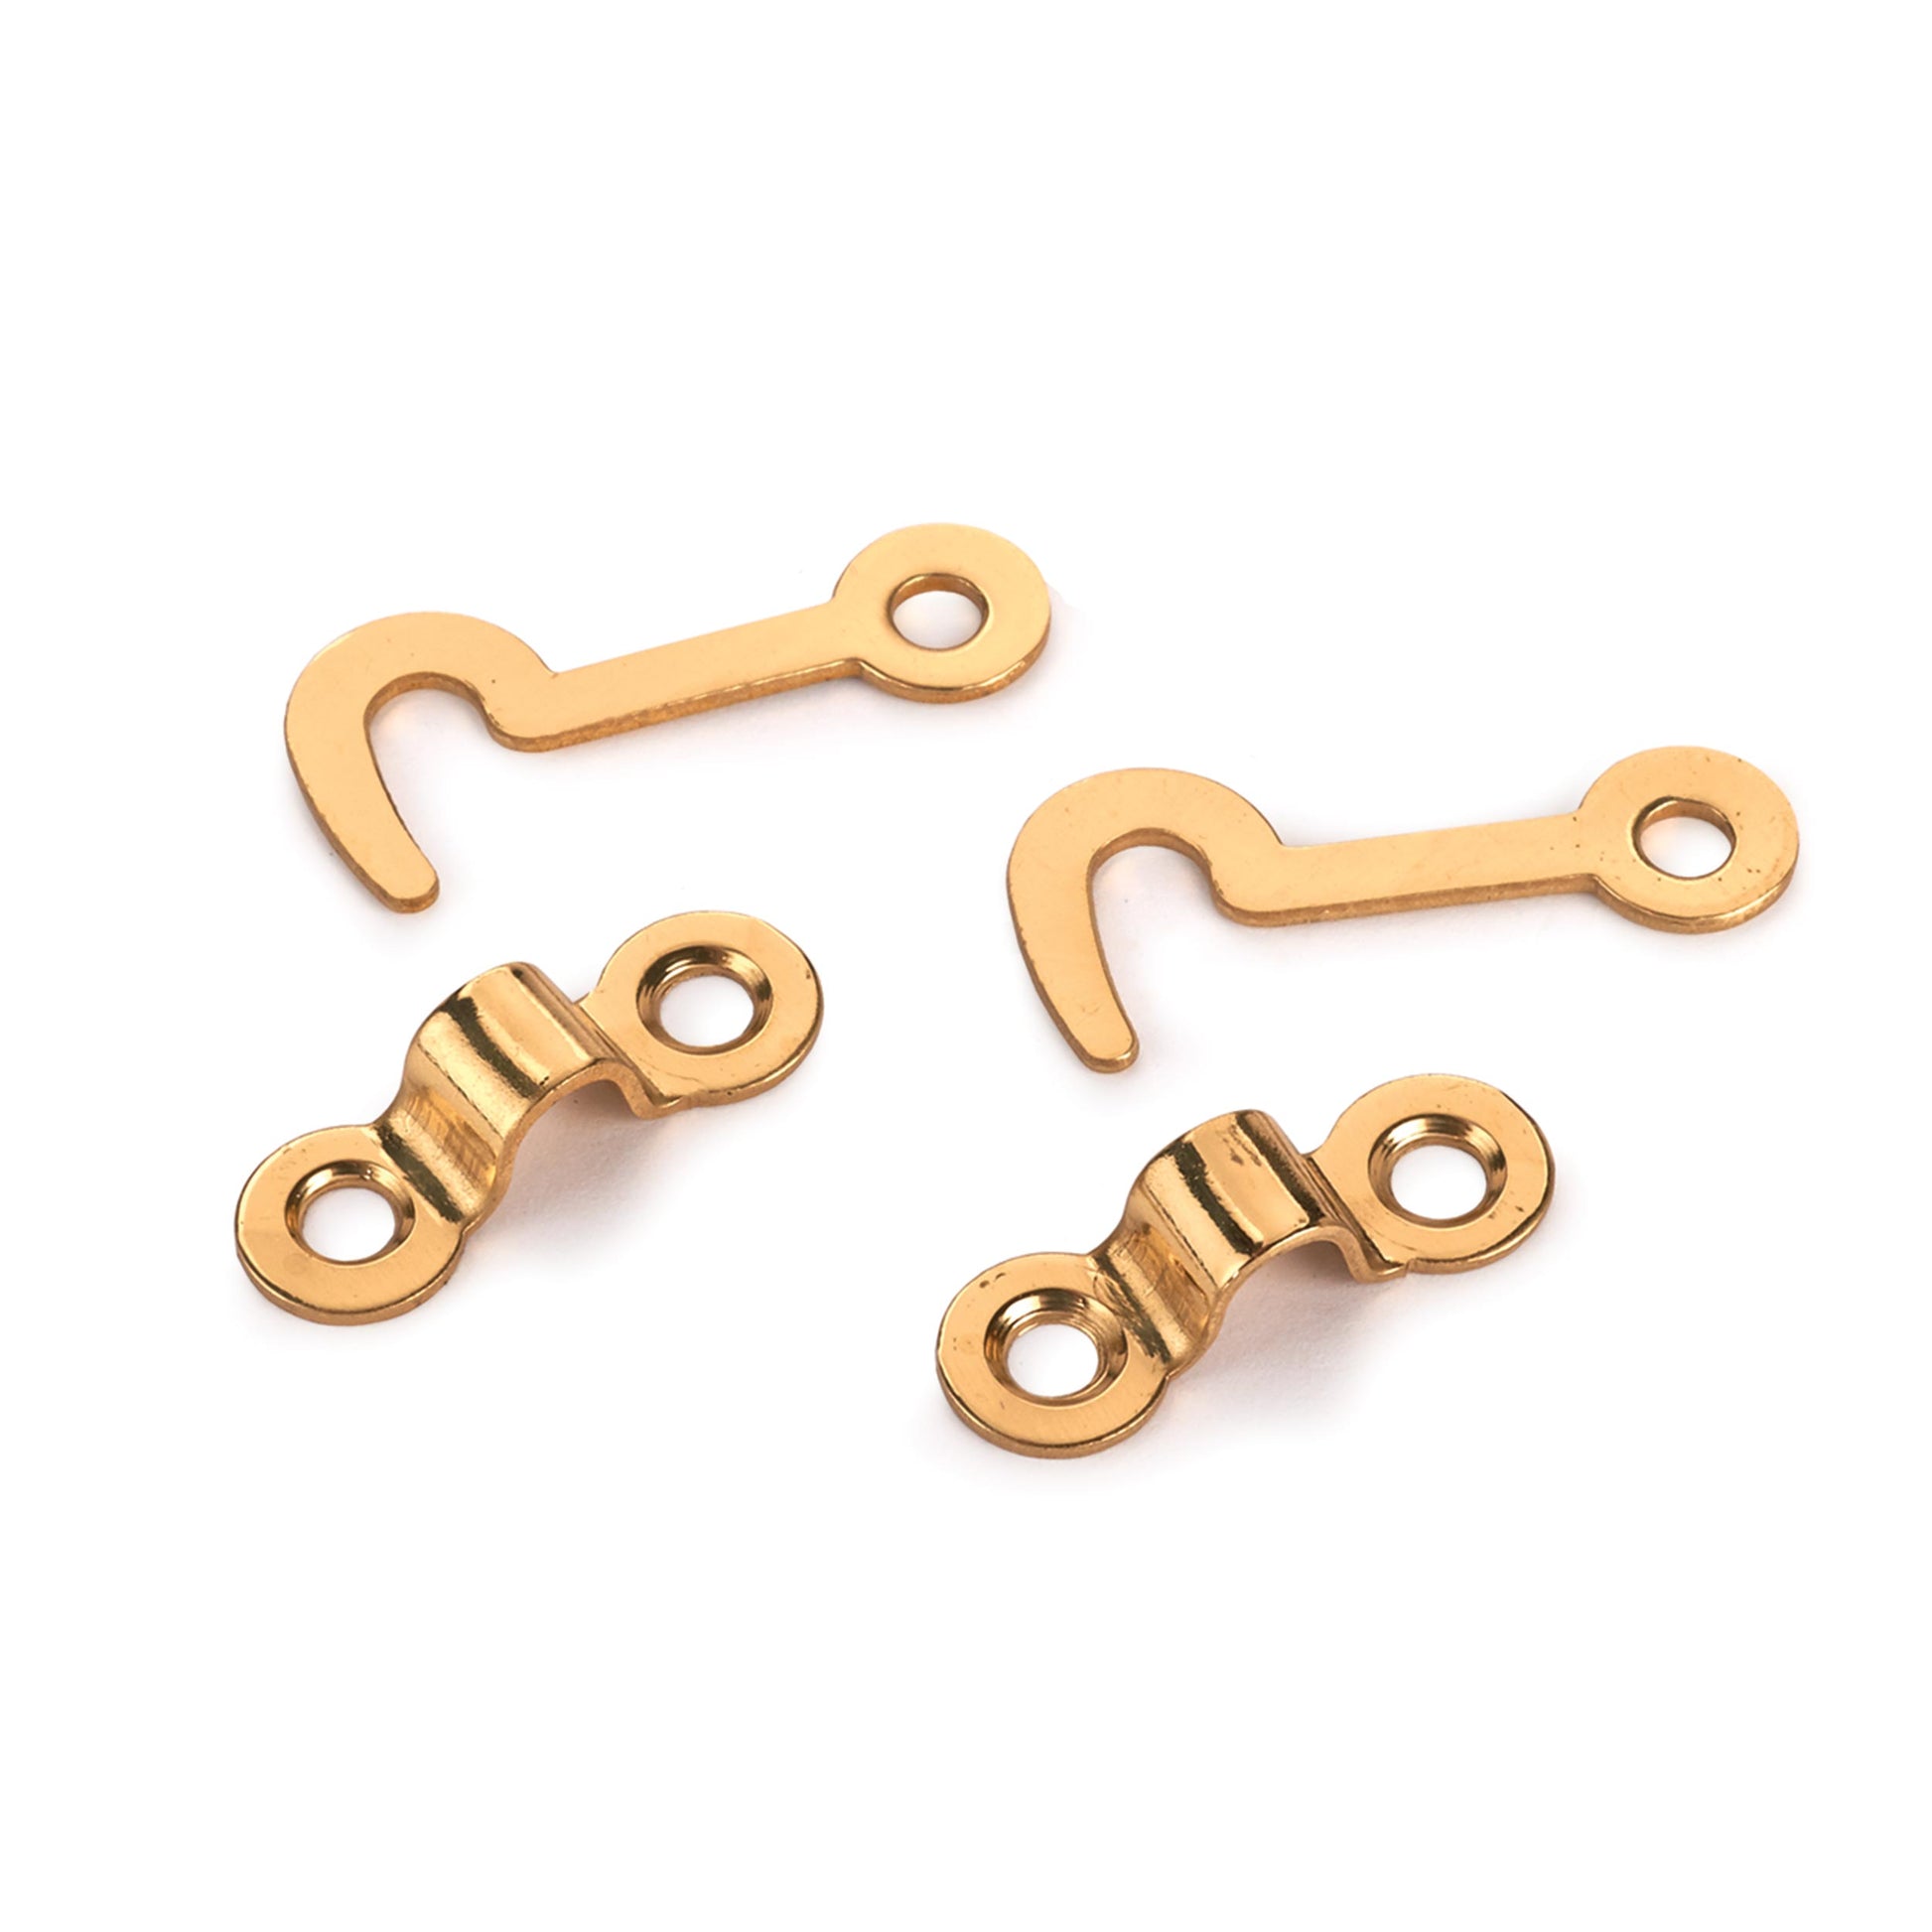 National Solid Brass Miniature Hook and Staples Latch Hinge with Fasteners  - 2 Pack